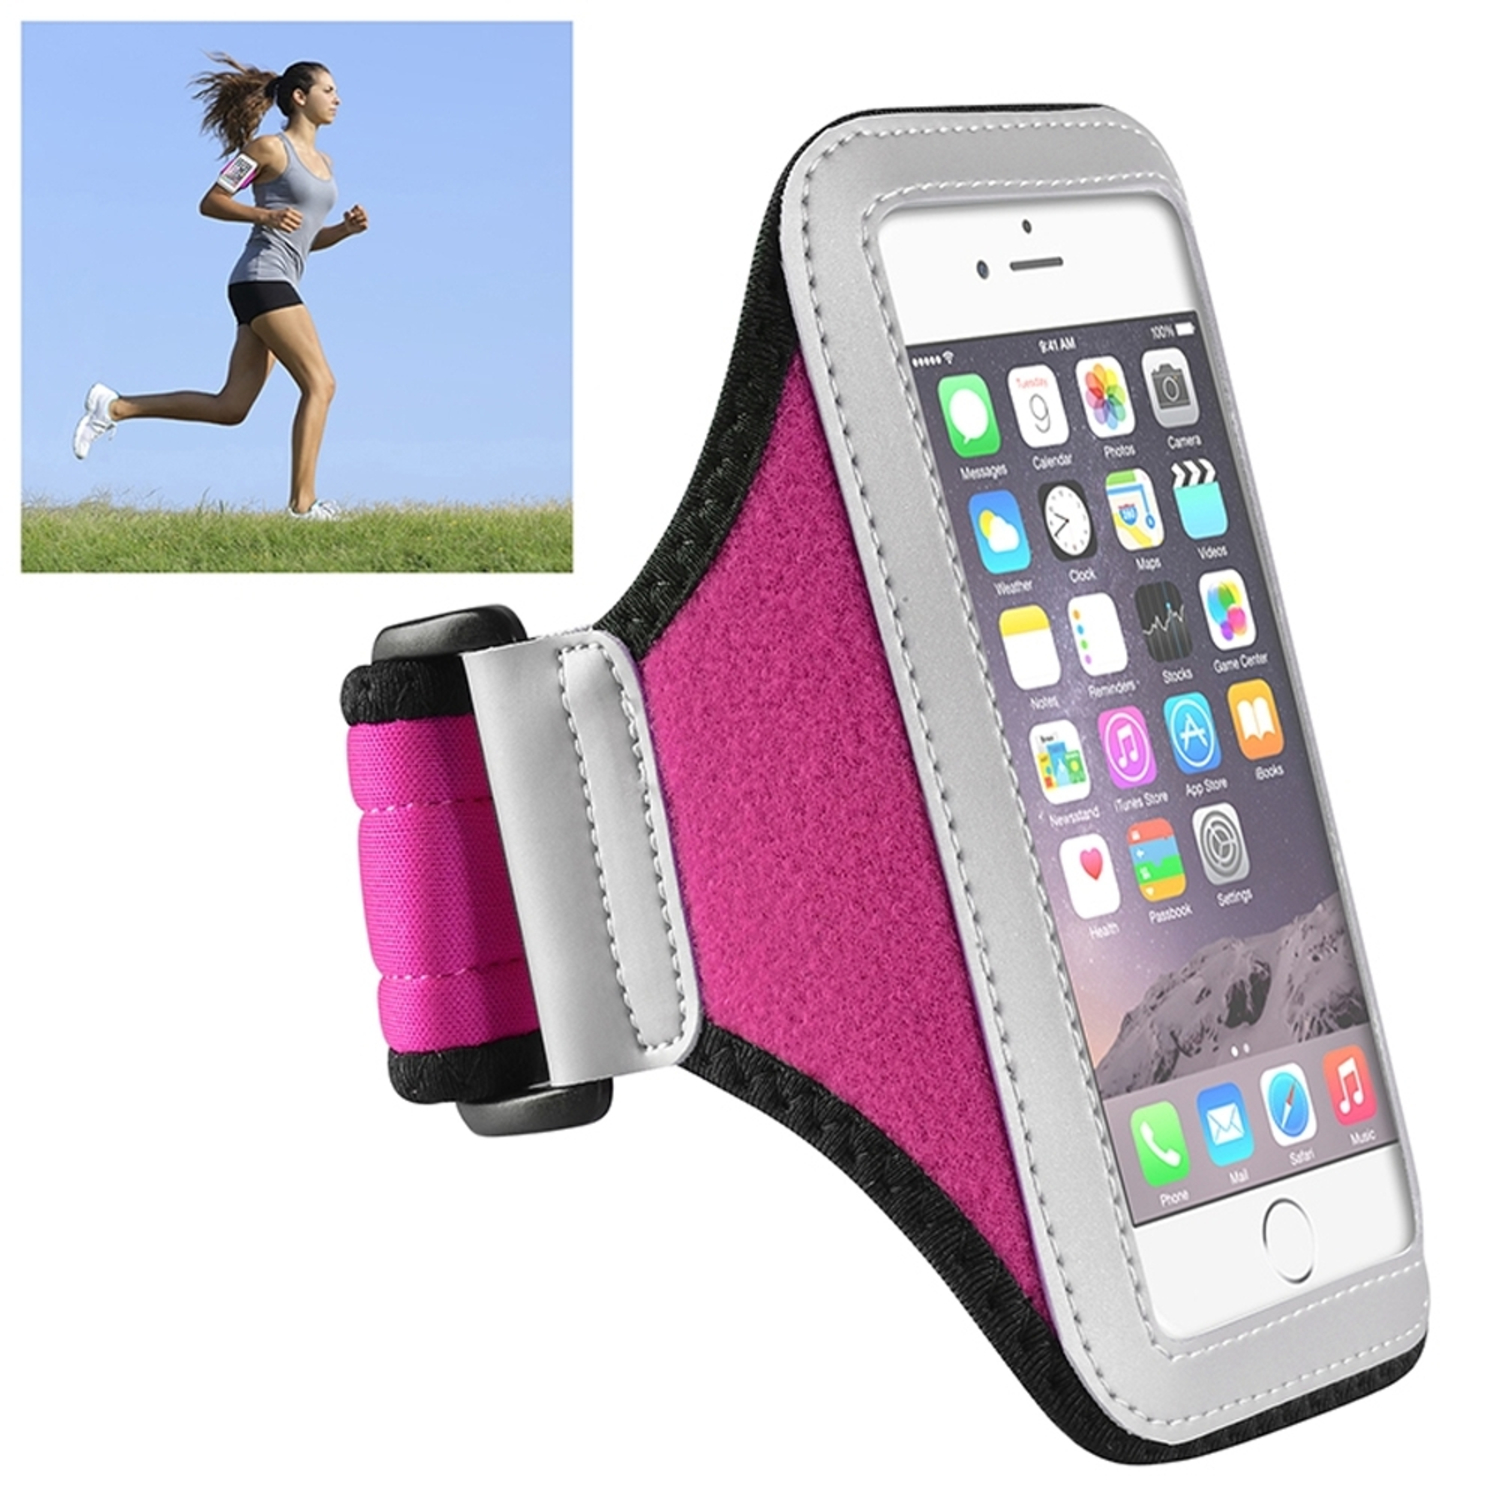 Insten Universal Workout Running Sports Exercise Gym Armband Case For iPhone 6 6S Samsung Galaxy S6 S6 Edge, Silver\/Pink